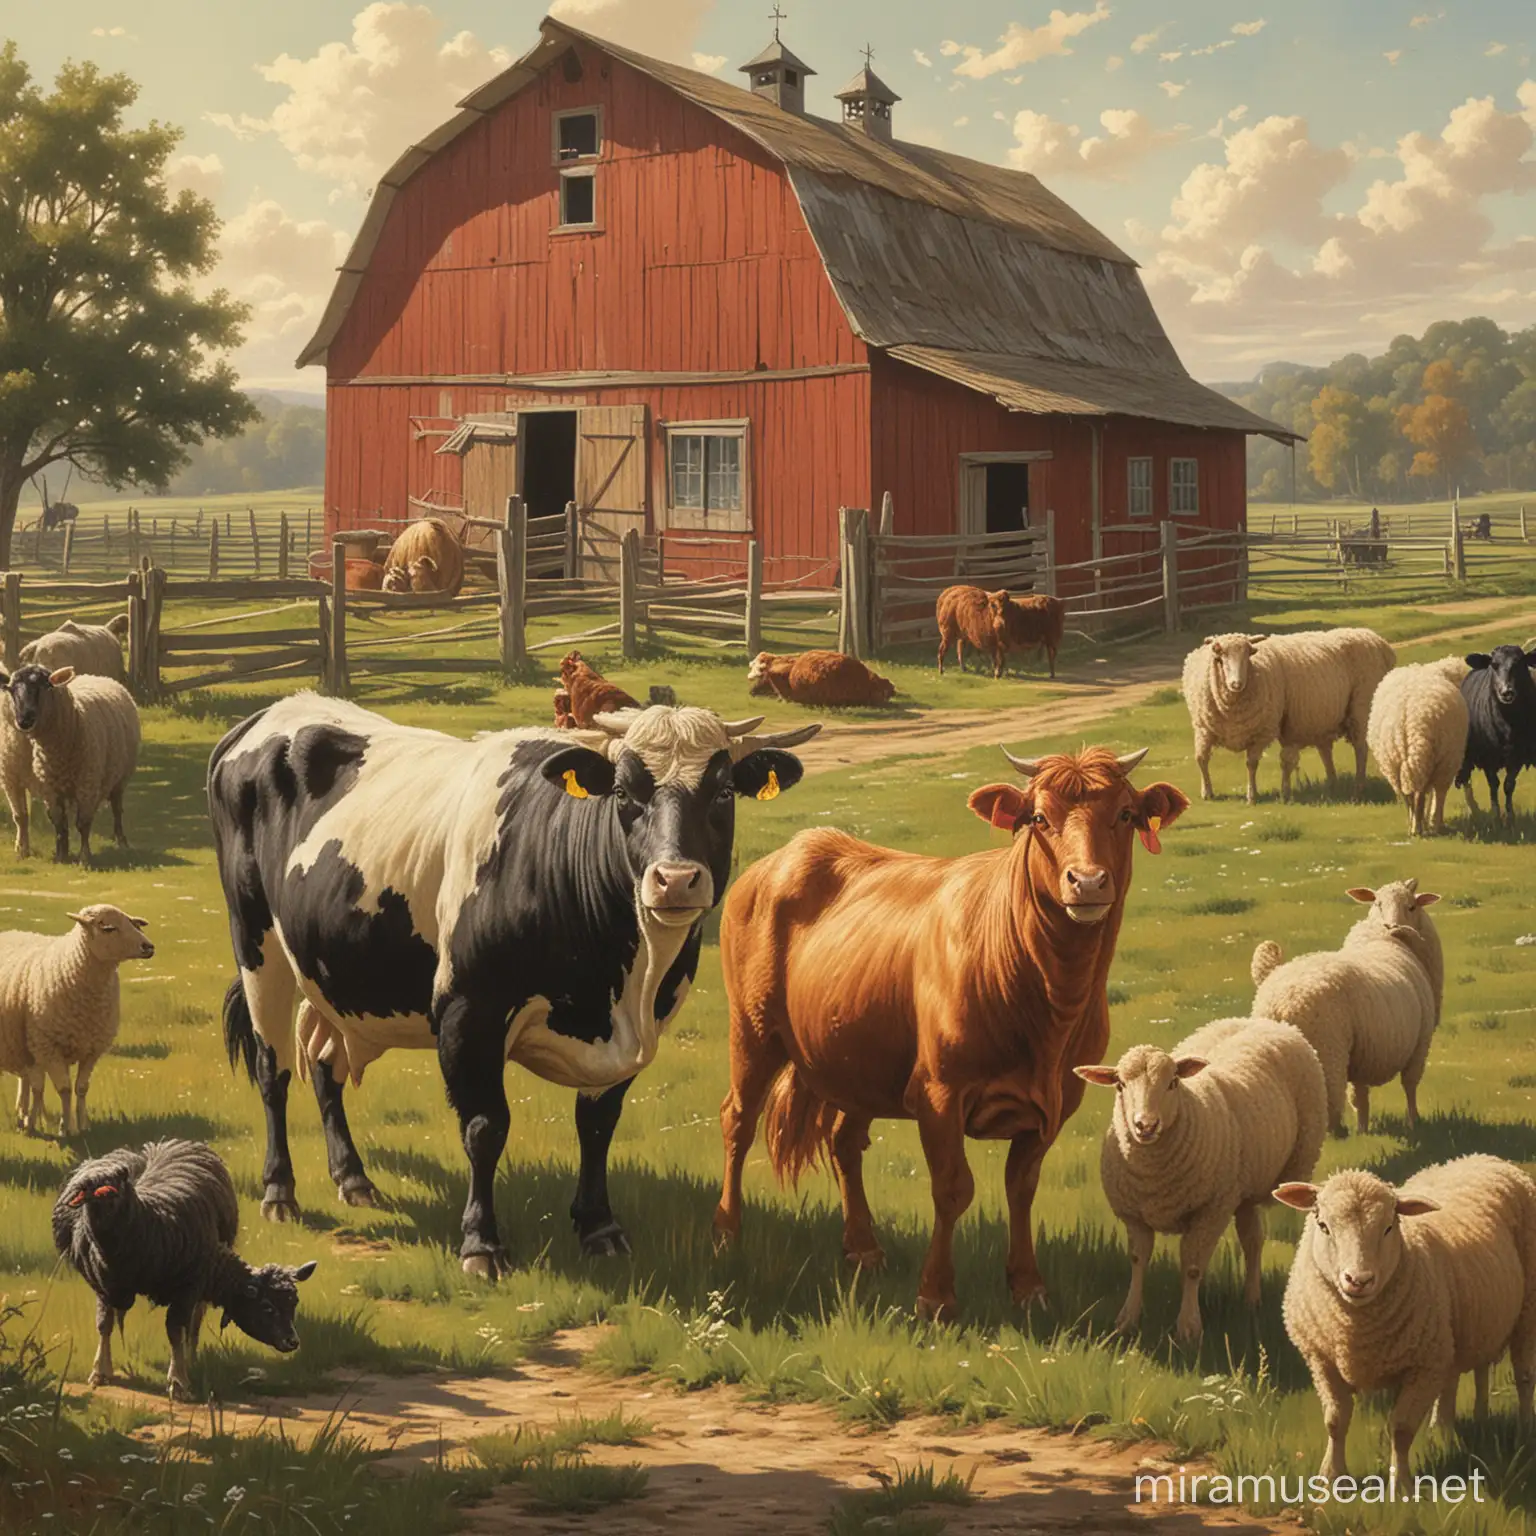 Rural Farm Animals Cow Sheep and Rooster in Antique Setting